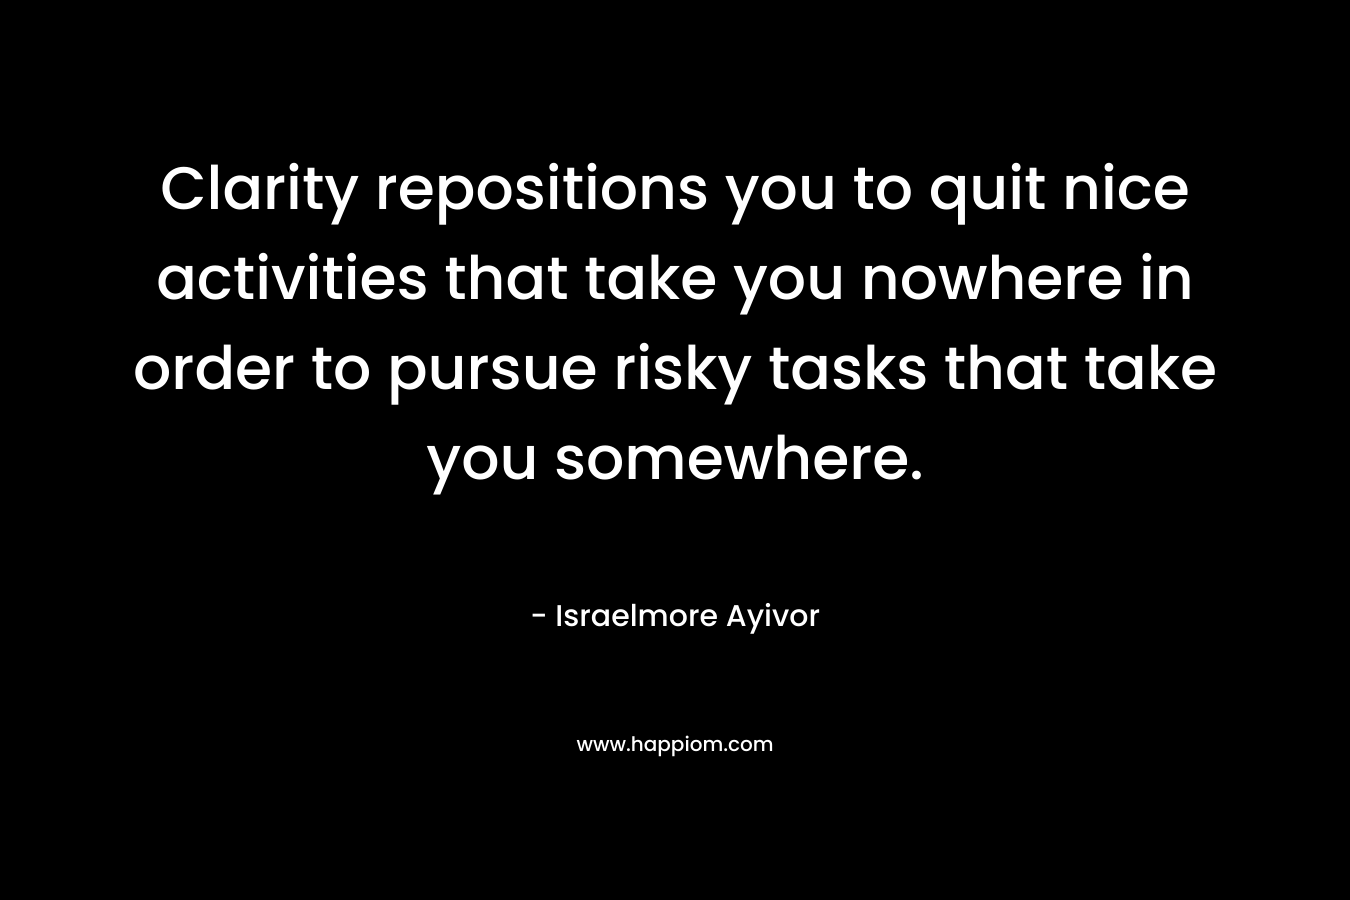 Clarity repositions you to quit nice activities that take you nowhere in order to pursue risky tasks that take you somewhere. – Israelmore Ayivor